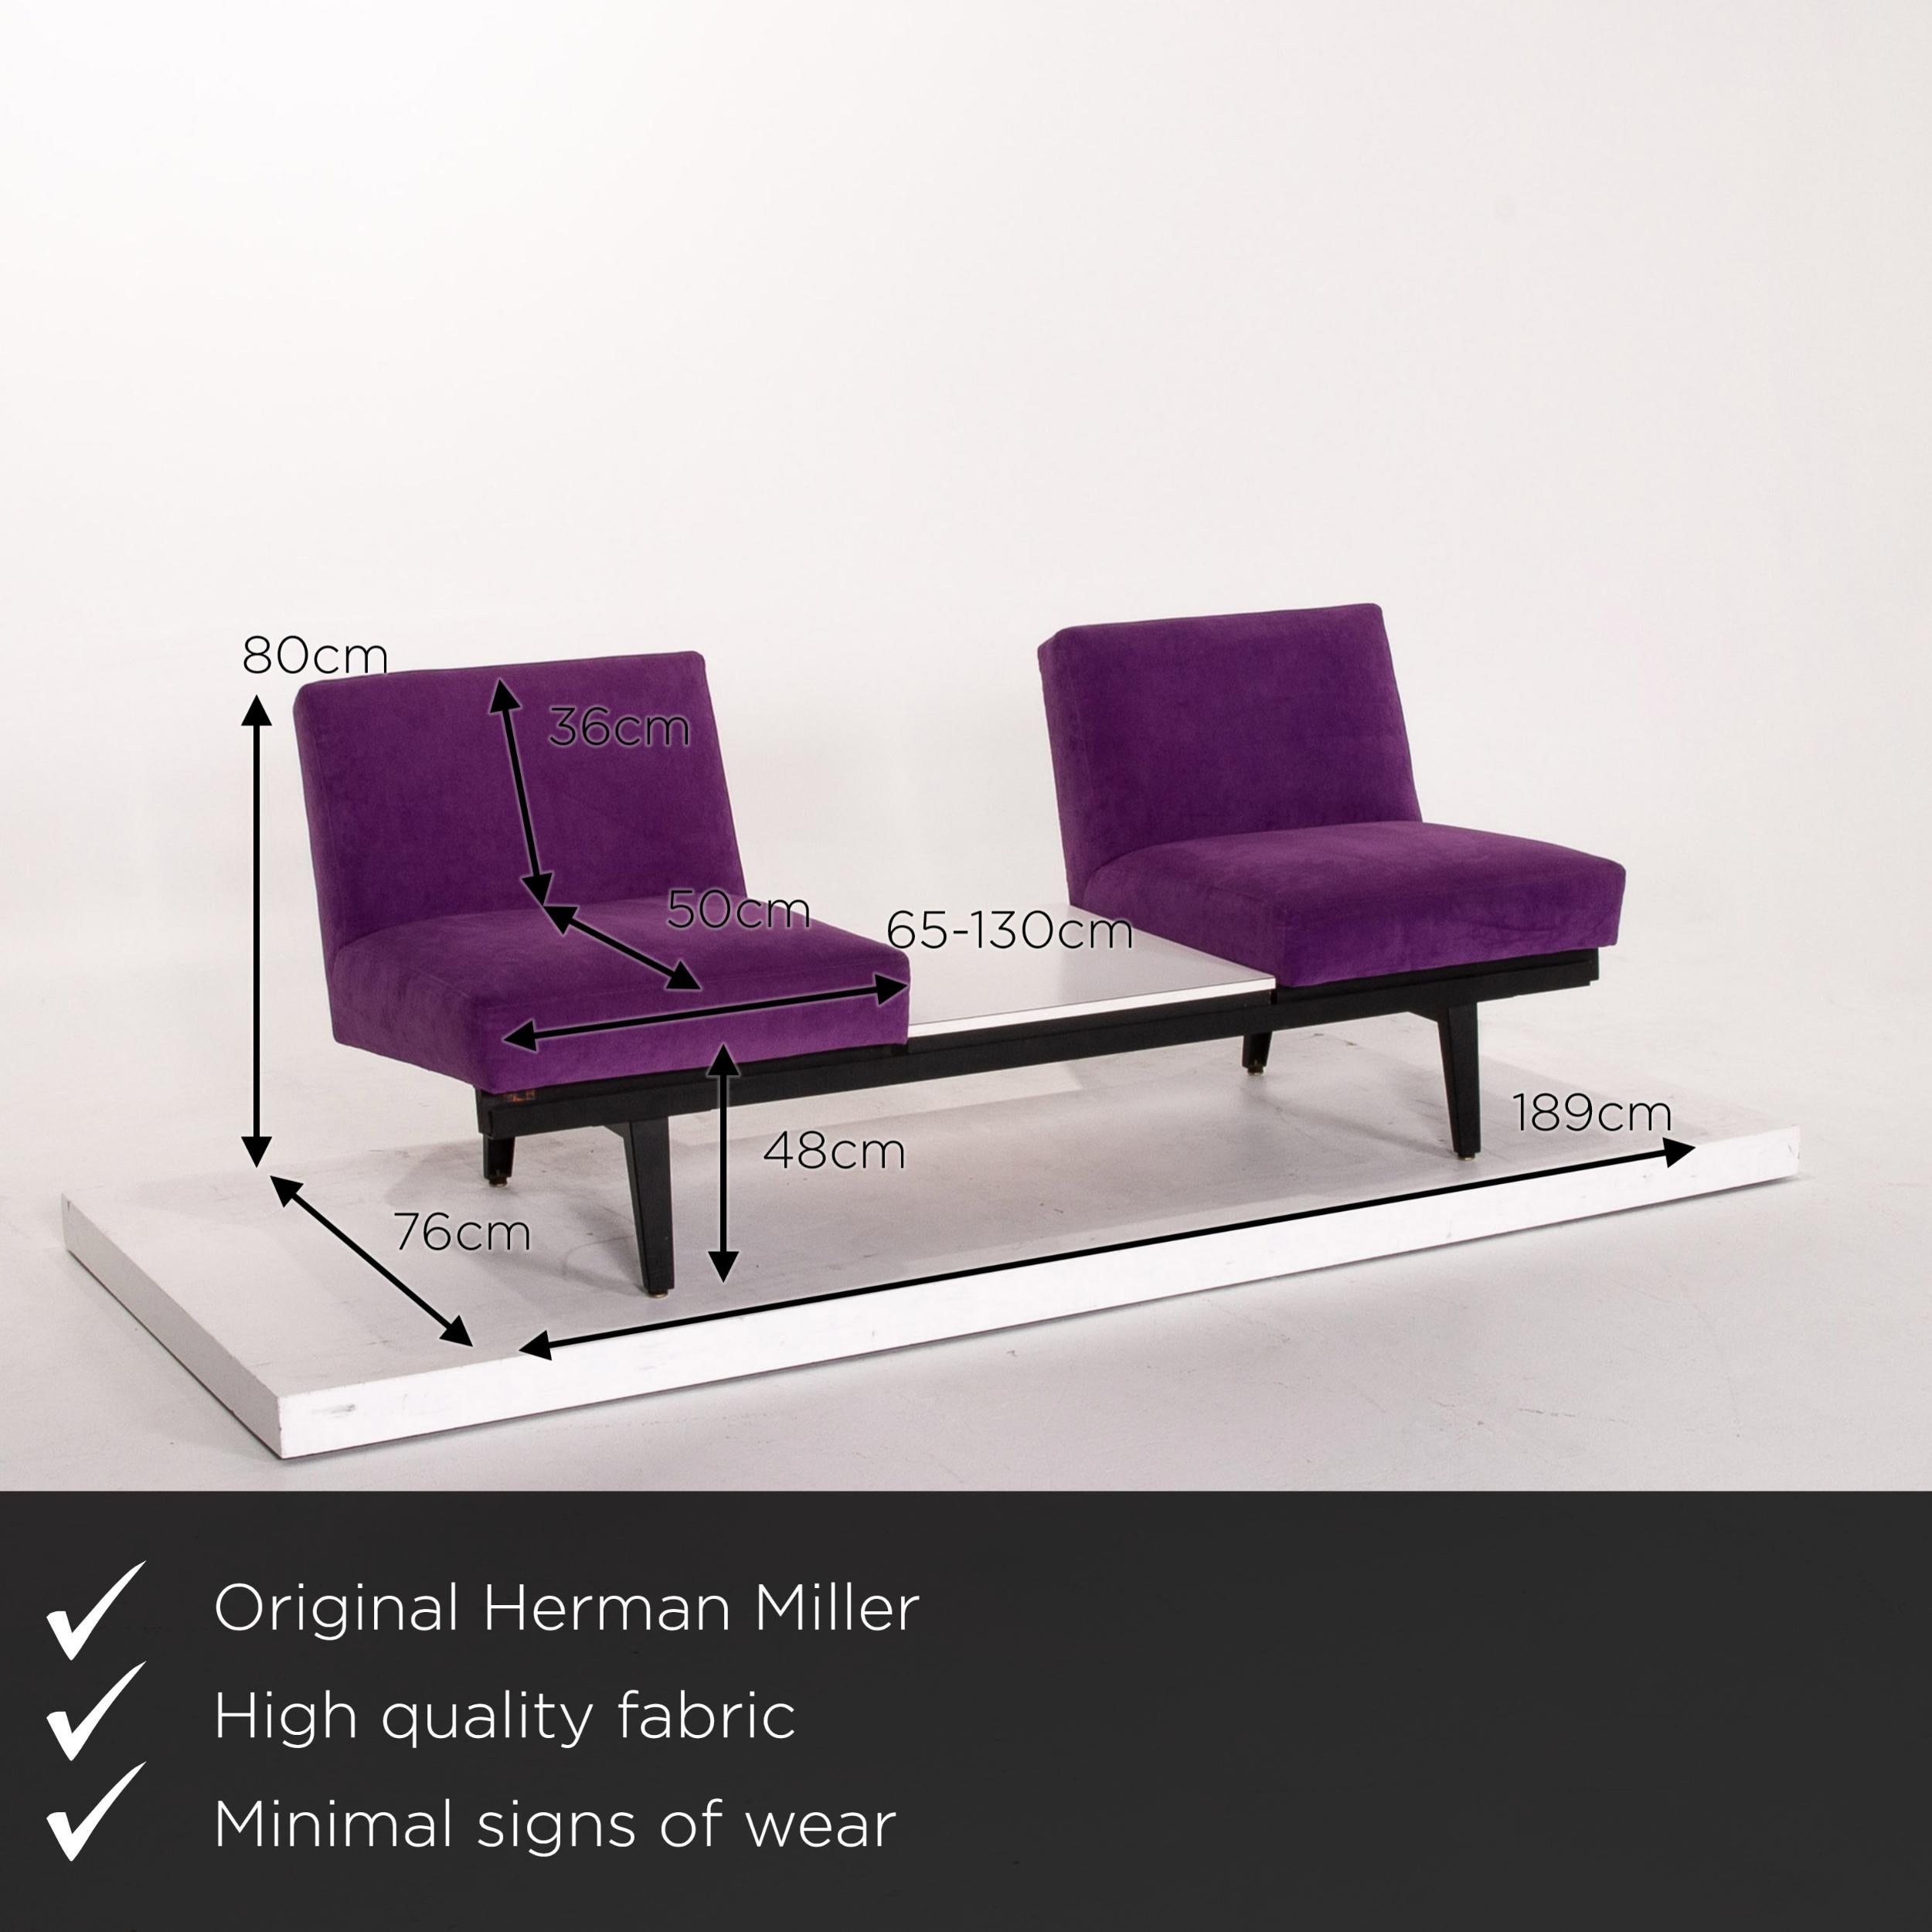 We present to you a Herman Miller fabric sofa set 2 two-seat 2 armchair.
 

 Product measurements in centimeters:
 

Depth 76
Width 189
Height 80
Seat height 48
Seat depth 50
Seat width 65
Back height 36.

 